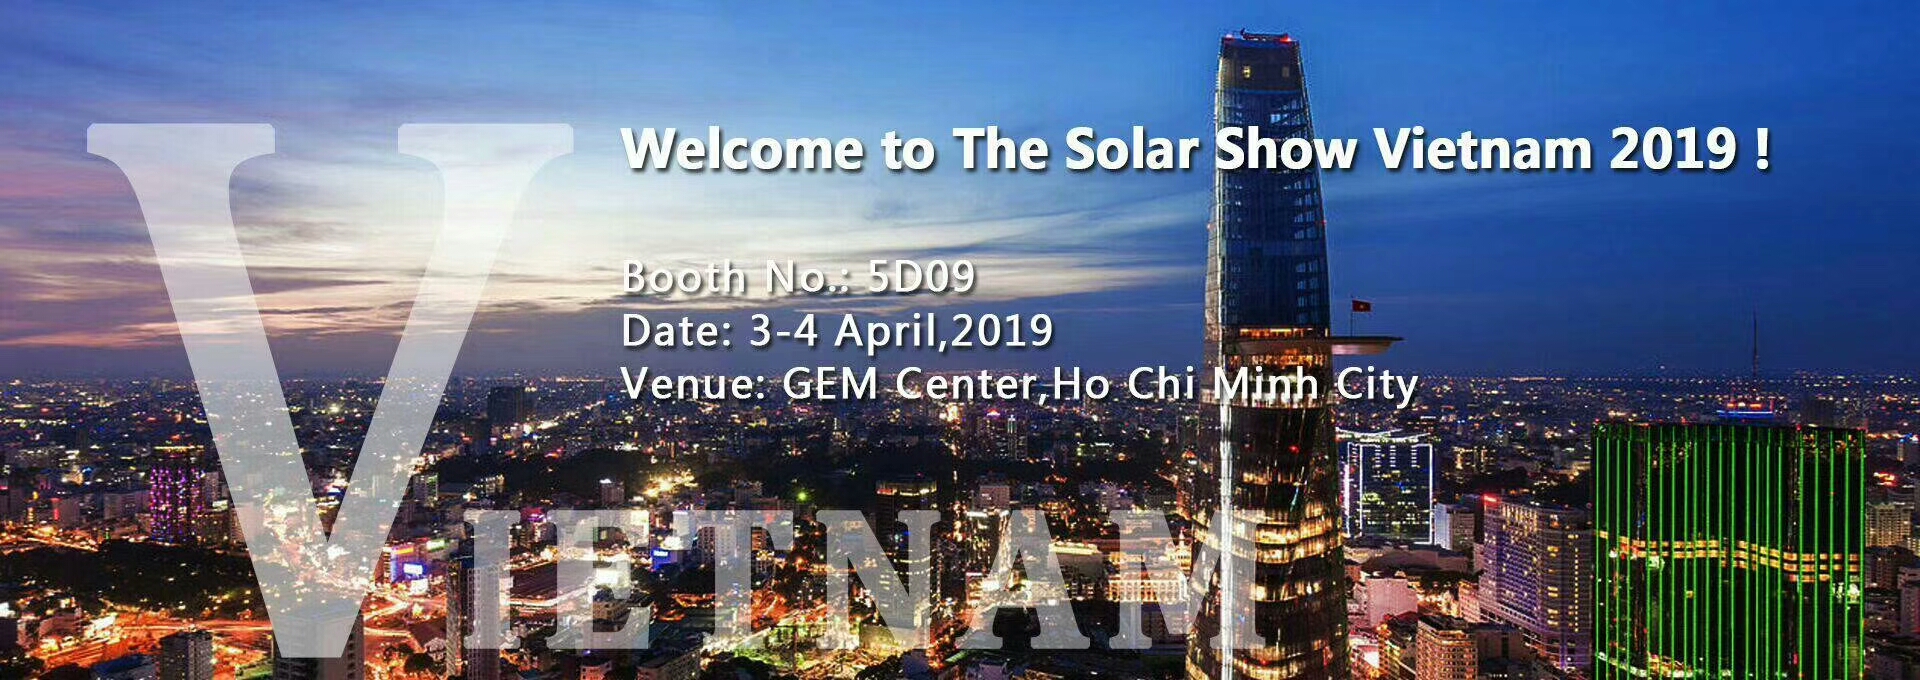 The moment of Solar Show Vietnam 2019